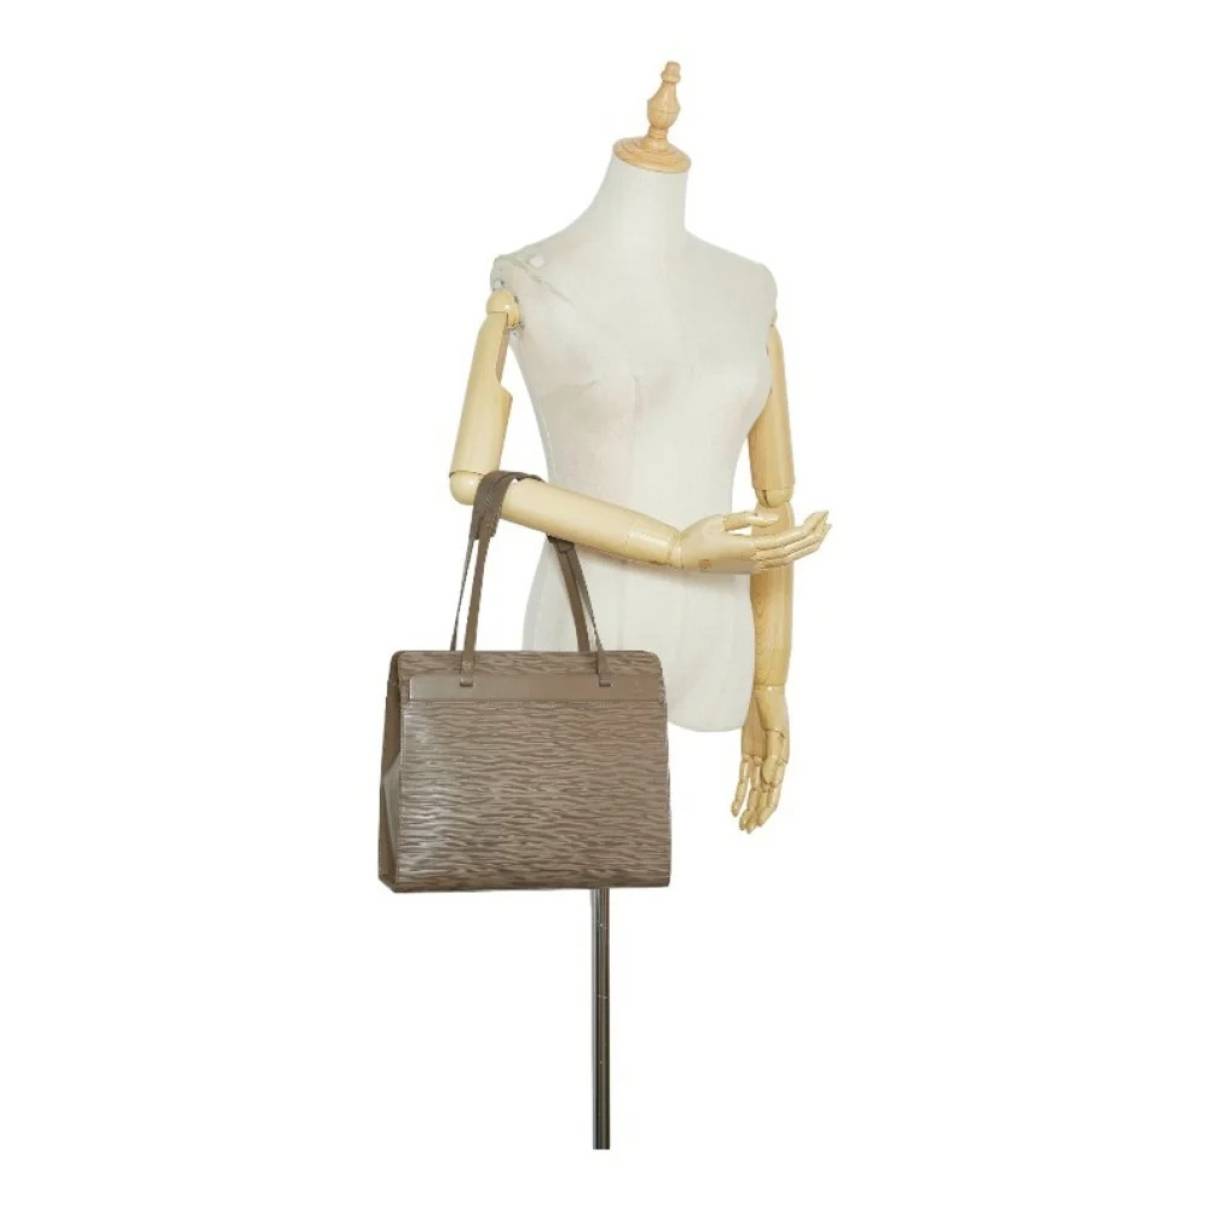 Croisette leather crossbody bag Louis Vuitton Beige in Leather